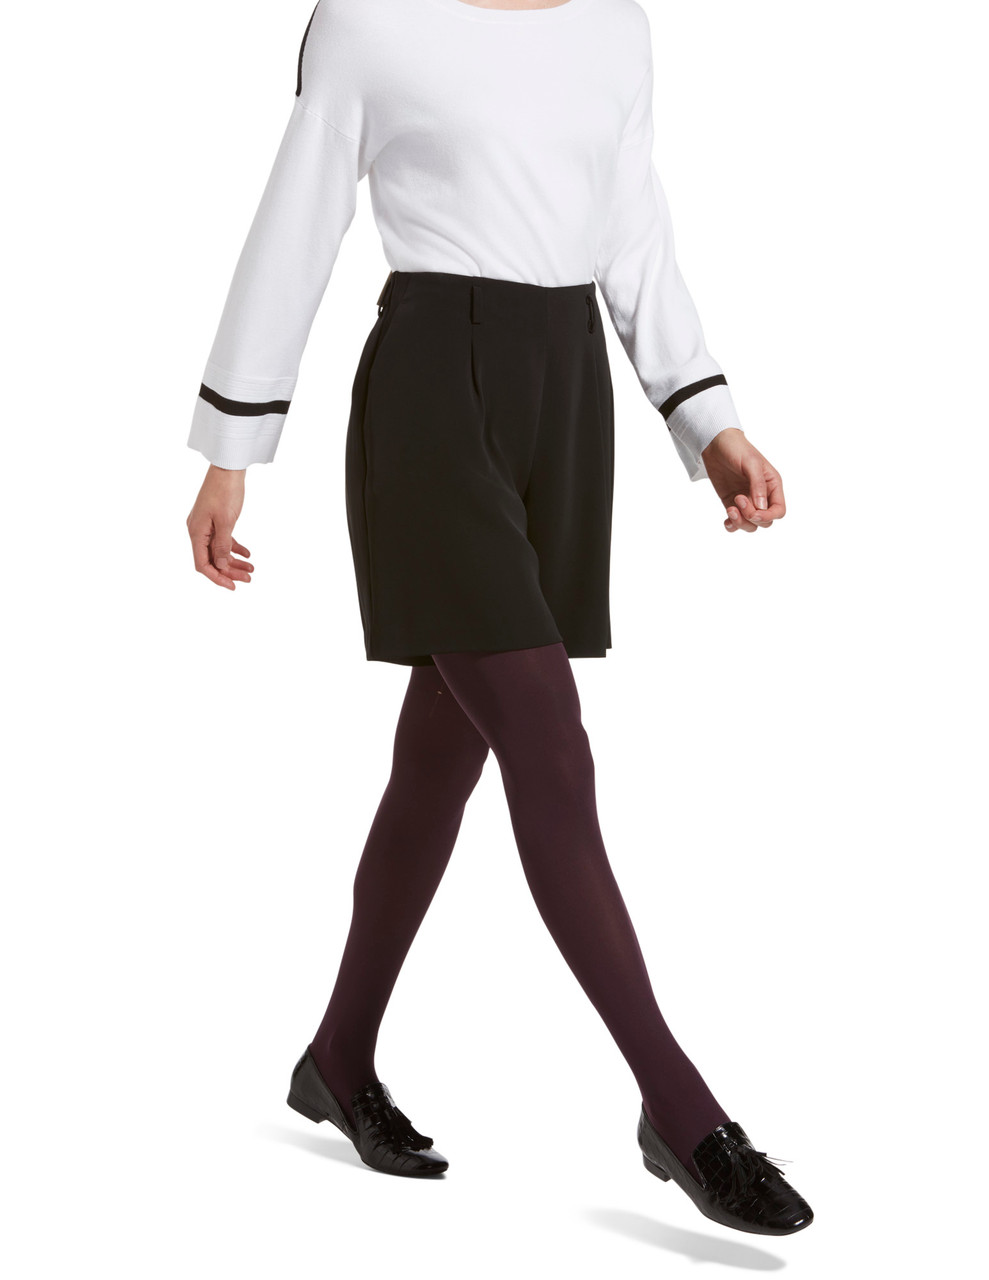 Tights Nuance 20 - Classic Matte Control Top buy in US, Canada with delivery